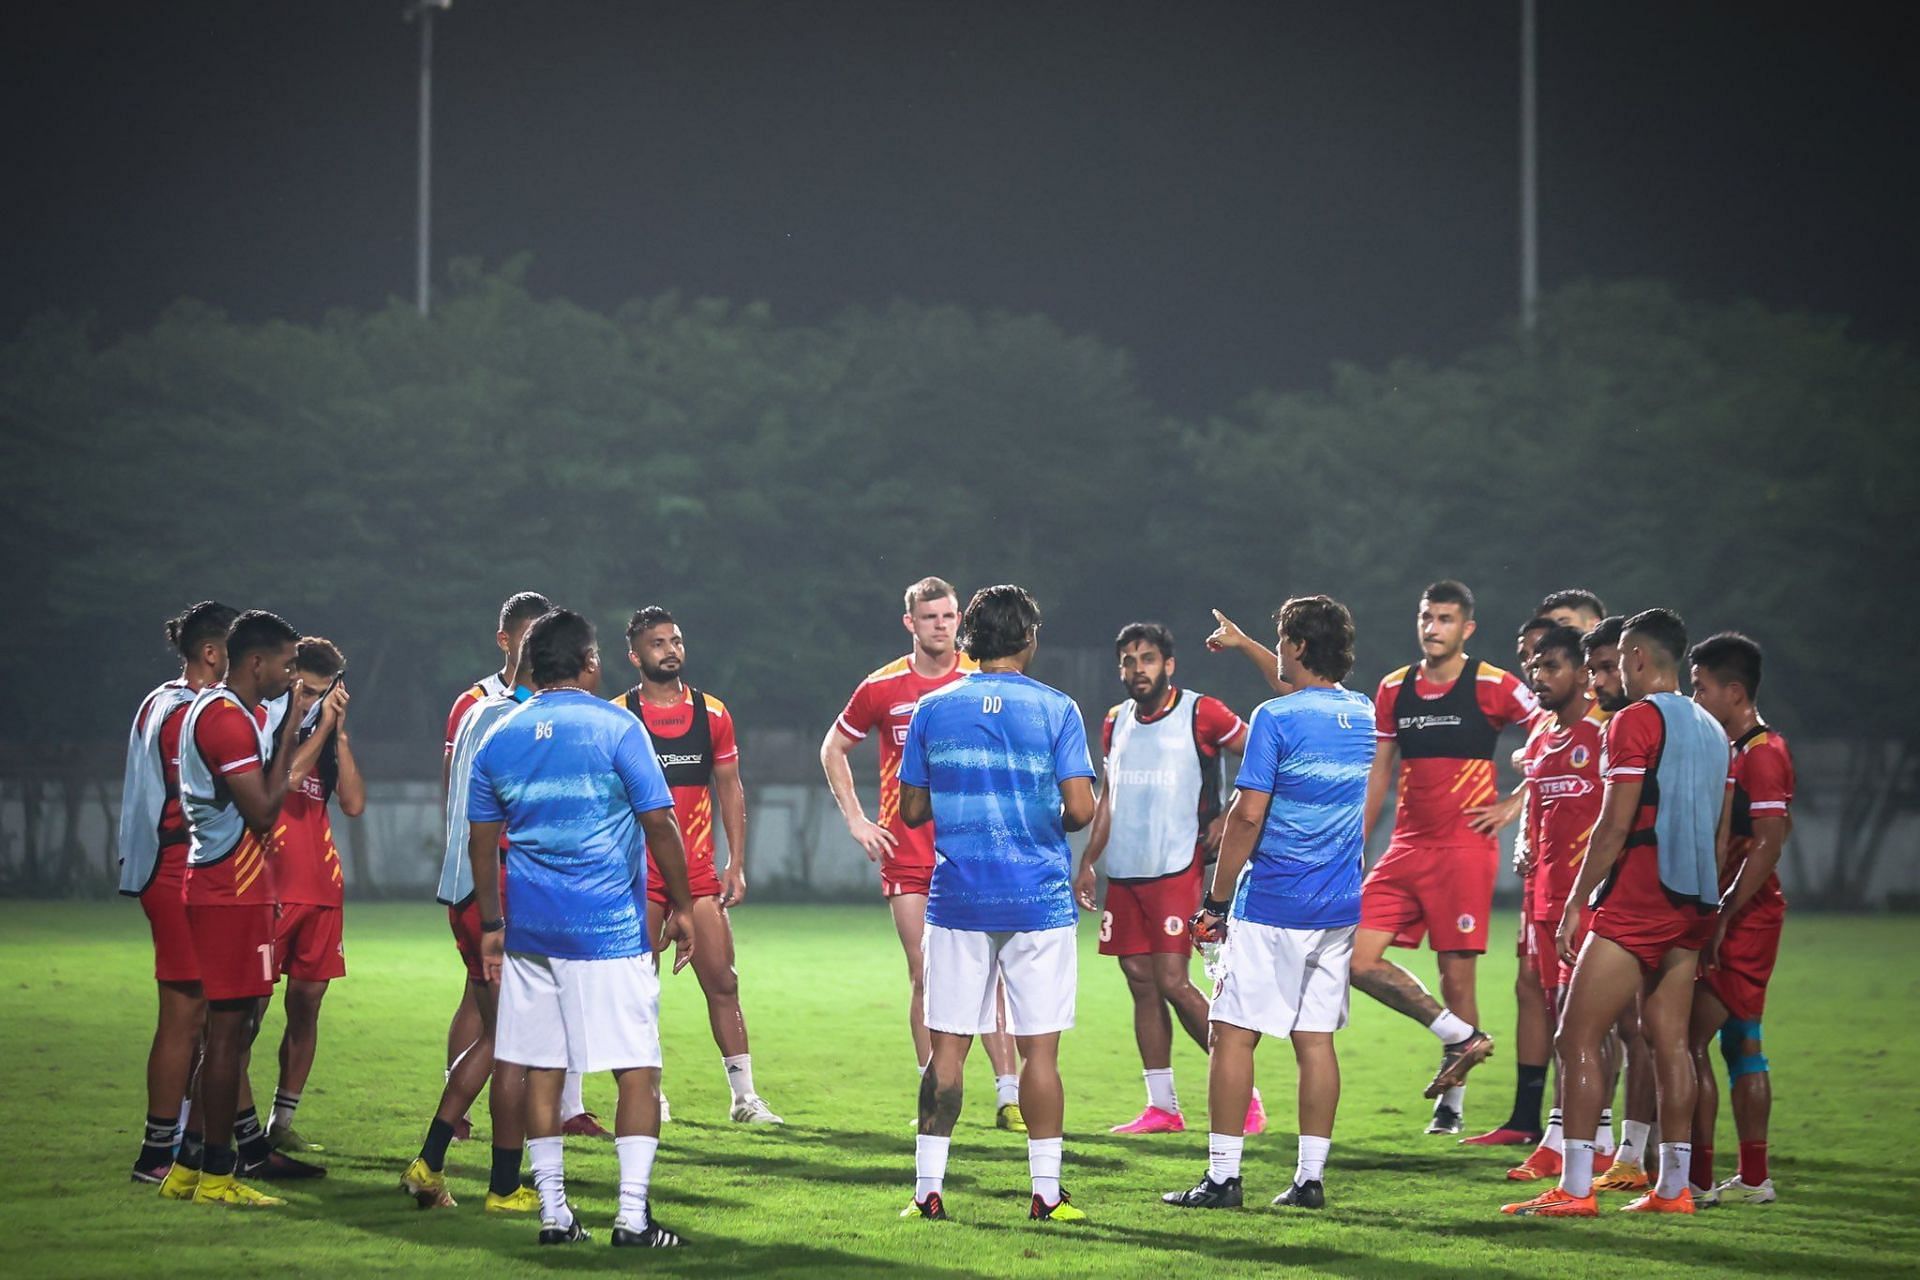 East Bengal FC will be inclined to break their poor run of form in the Kolkata Derby.